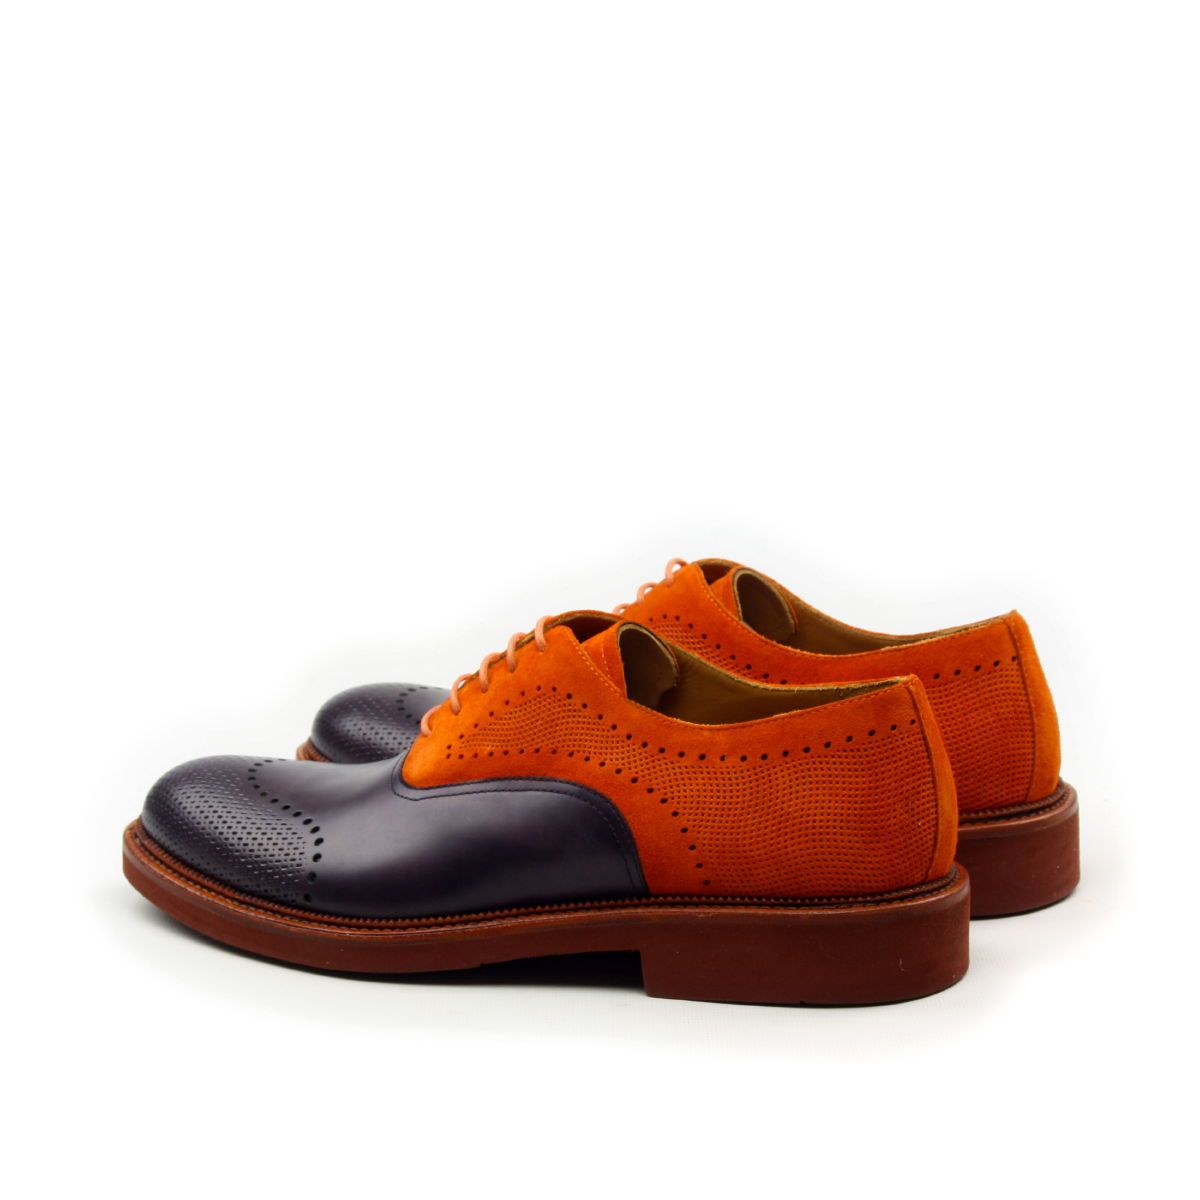 Omine Engraved Toe And Perforated Details Oxford